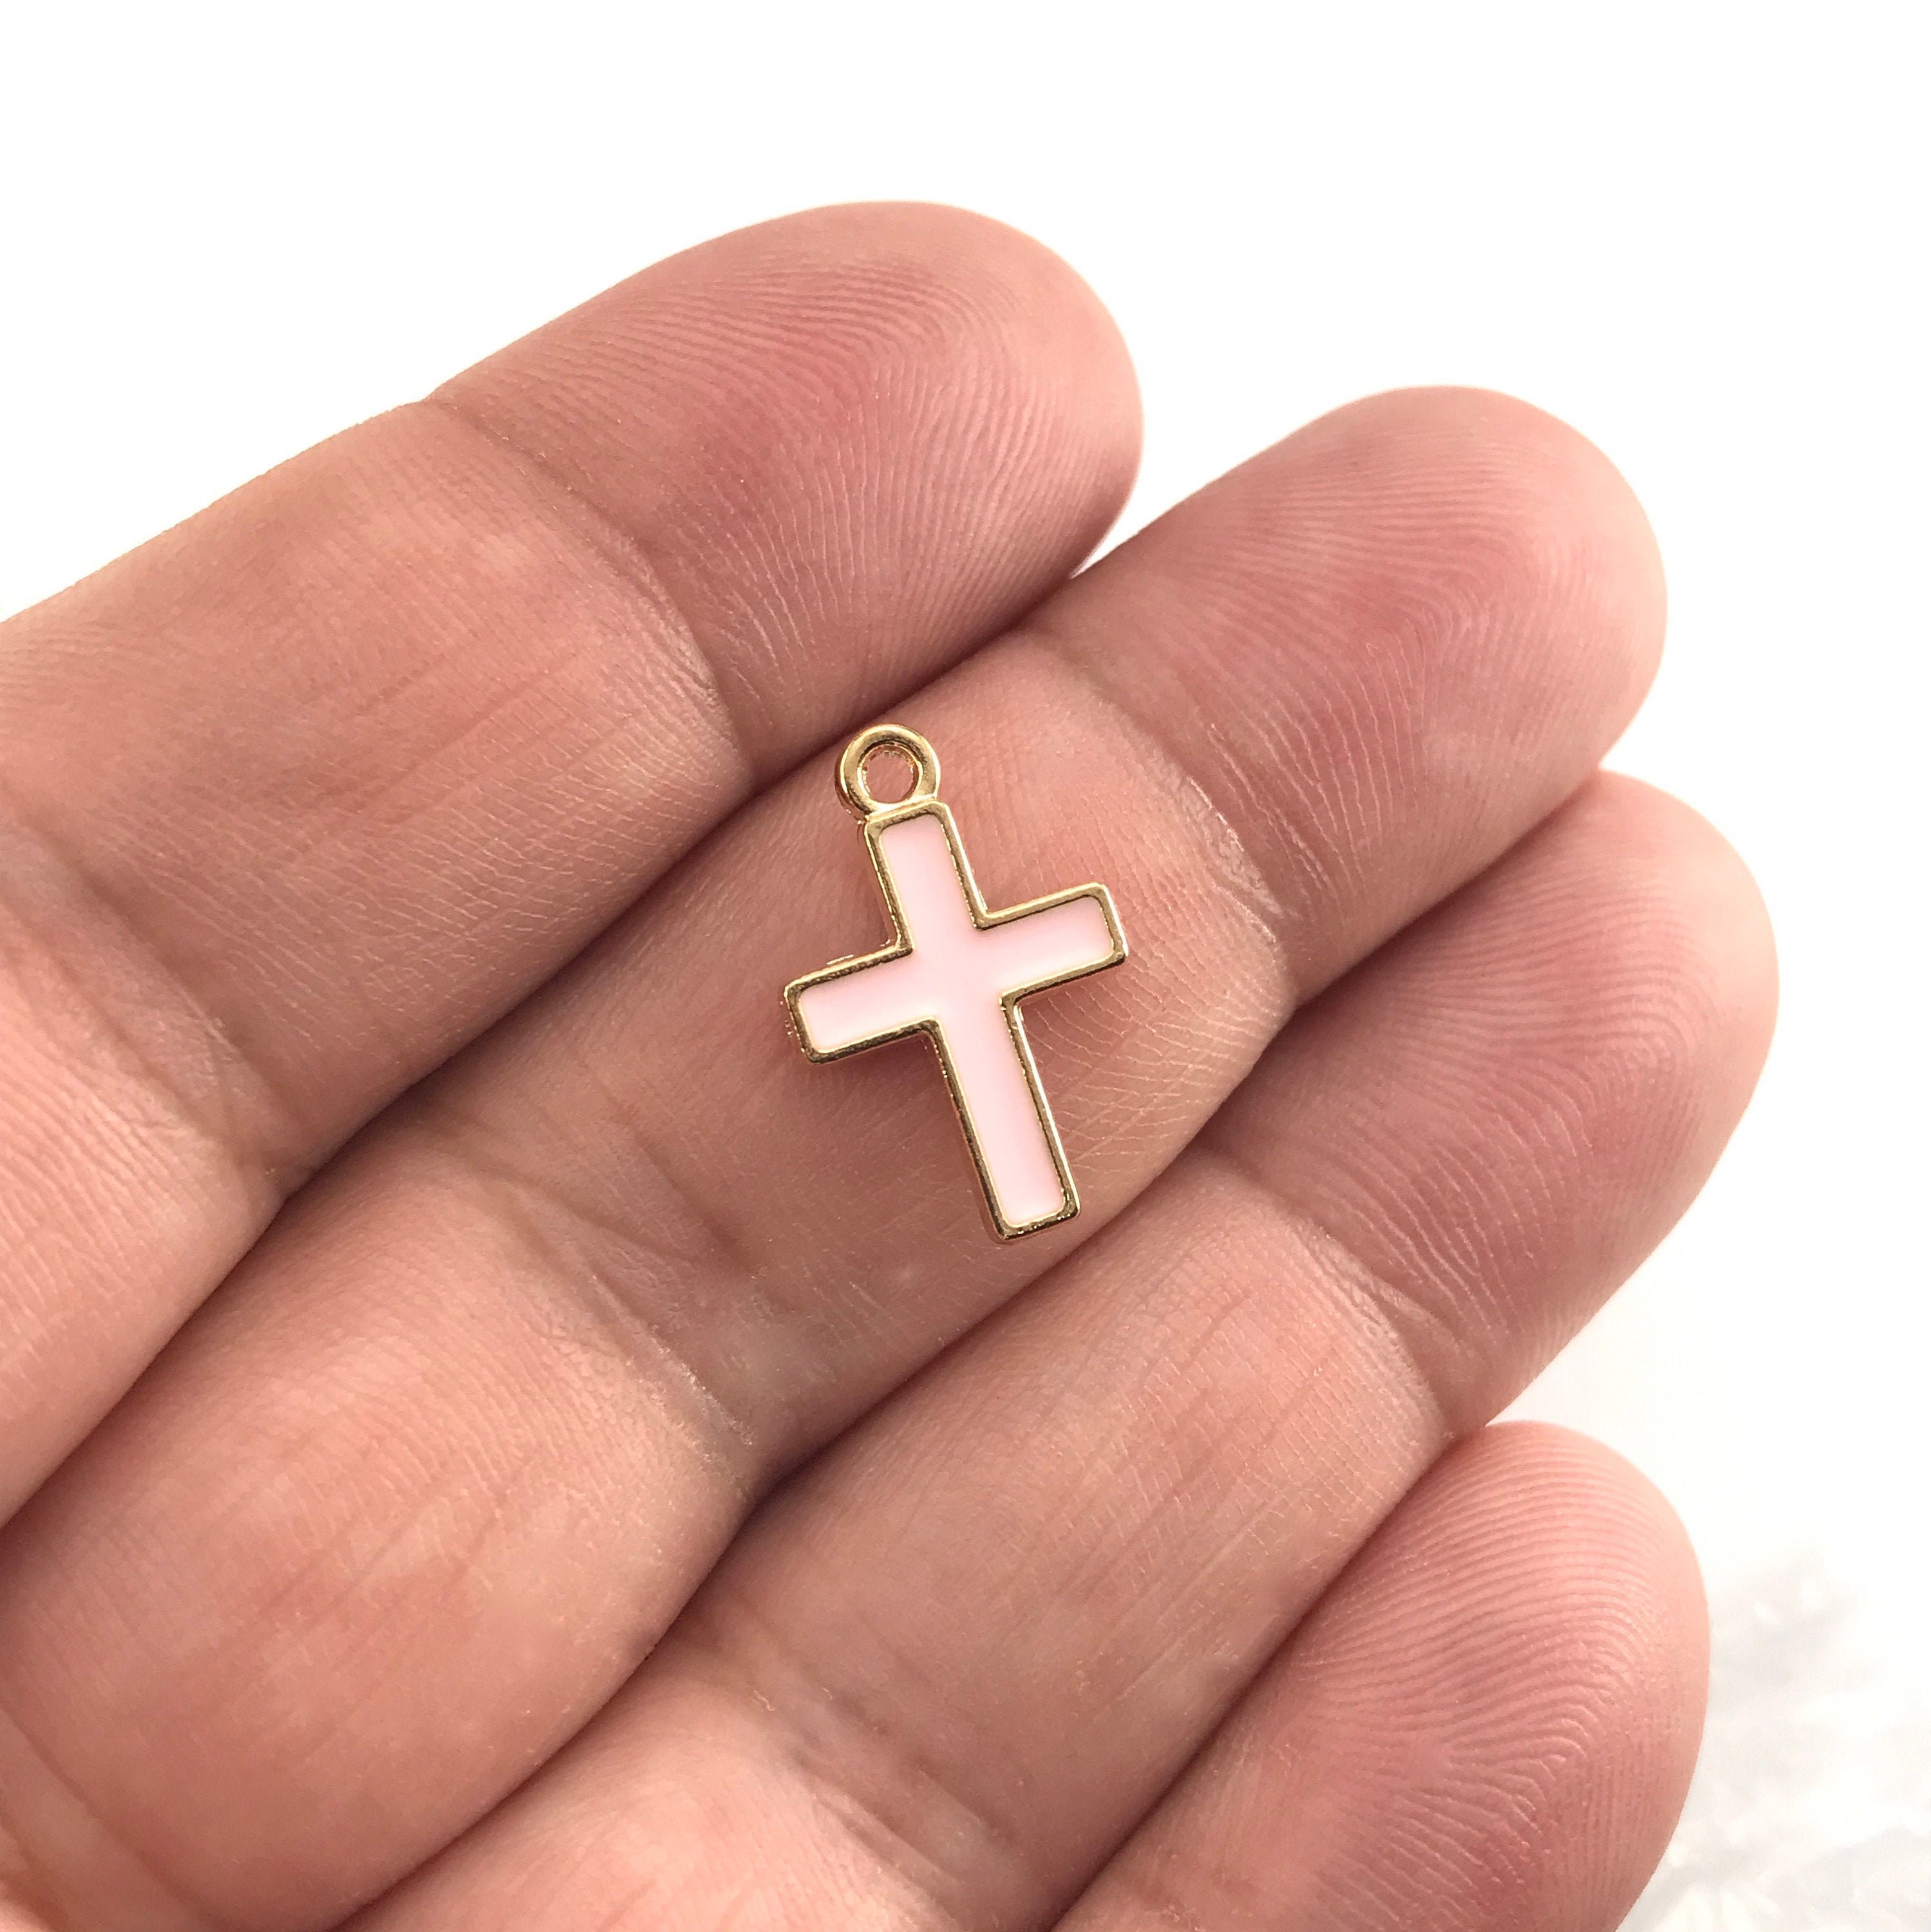 Small Pink Enamel Crucifix or Pendant Purchase 1, Set of Two or